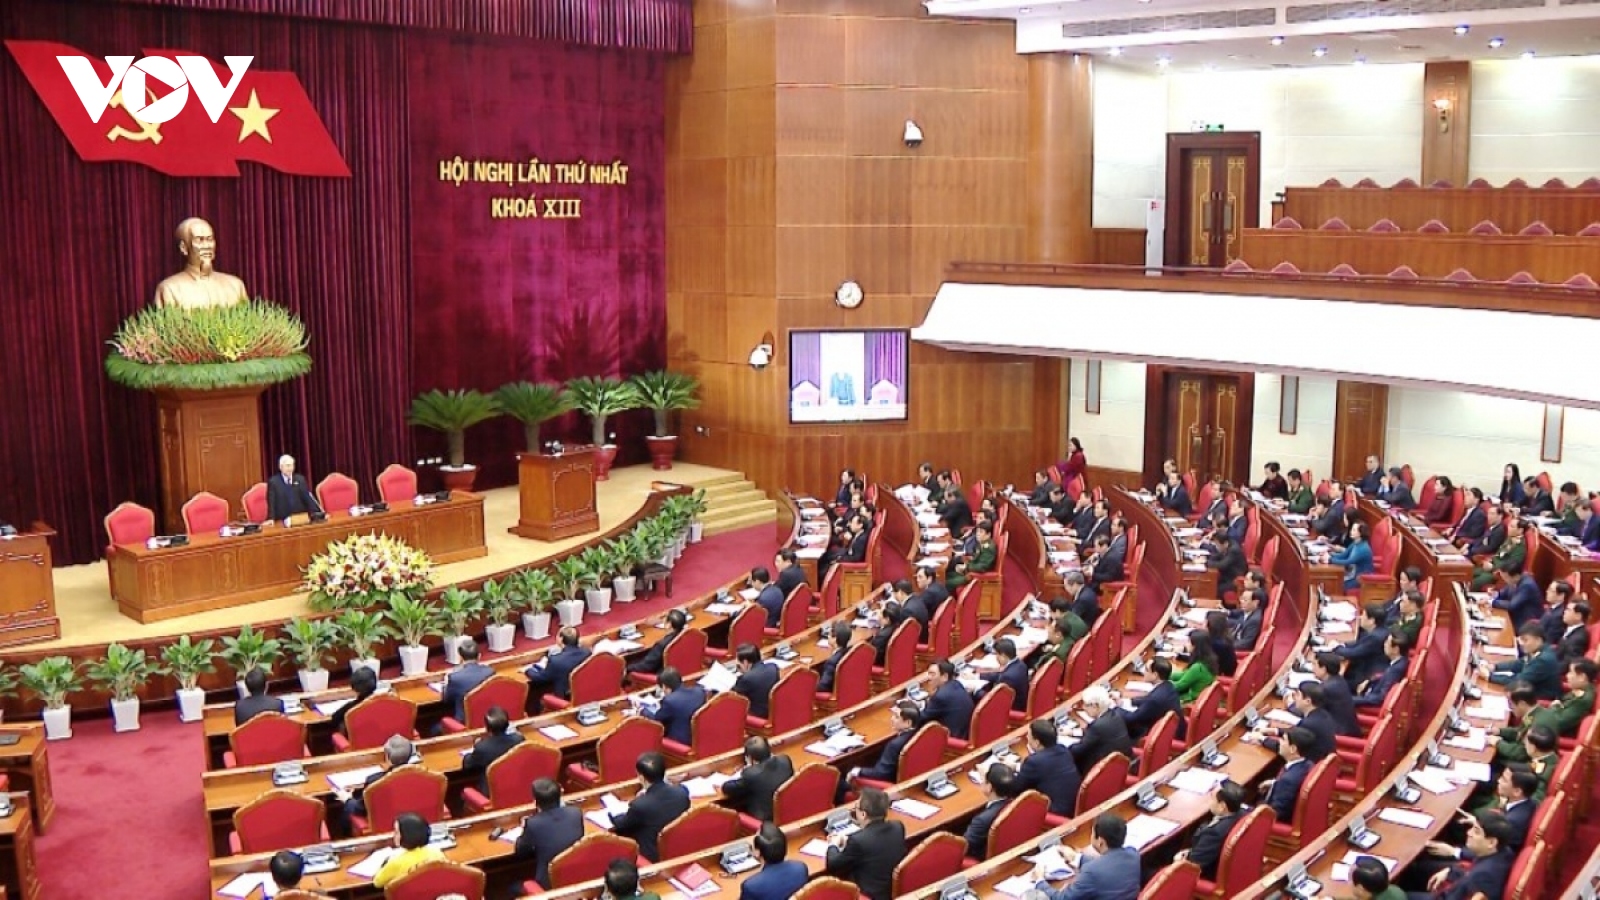 Politburo introduces candidates to key State positions